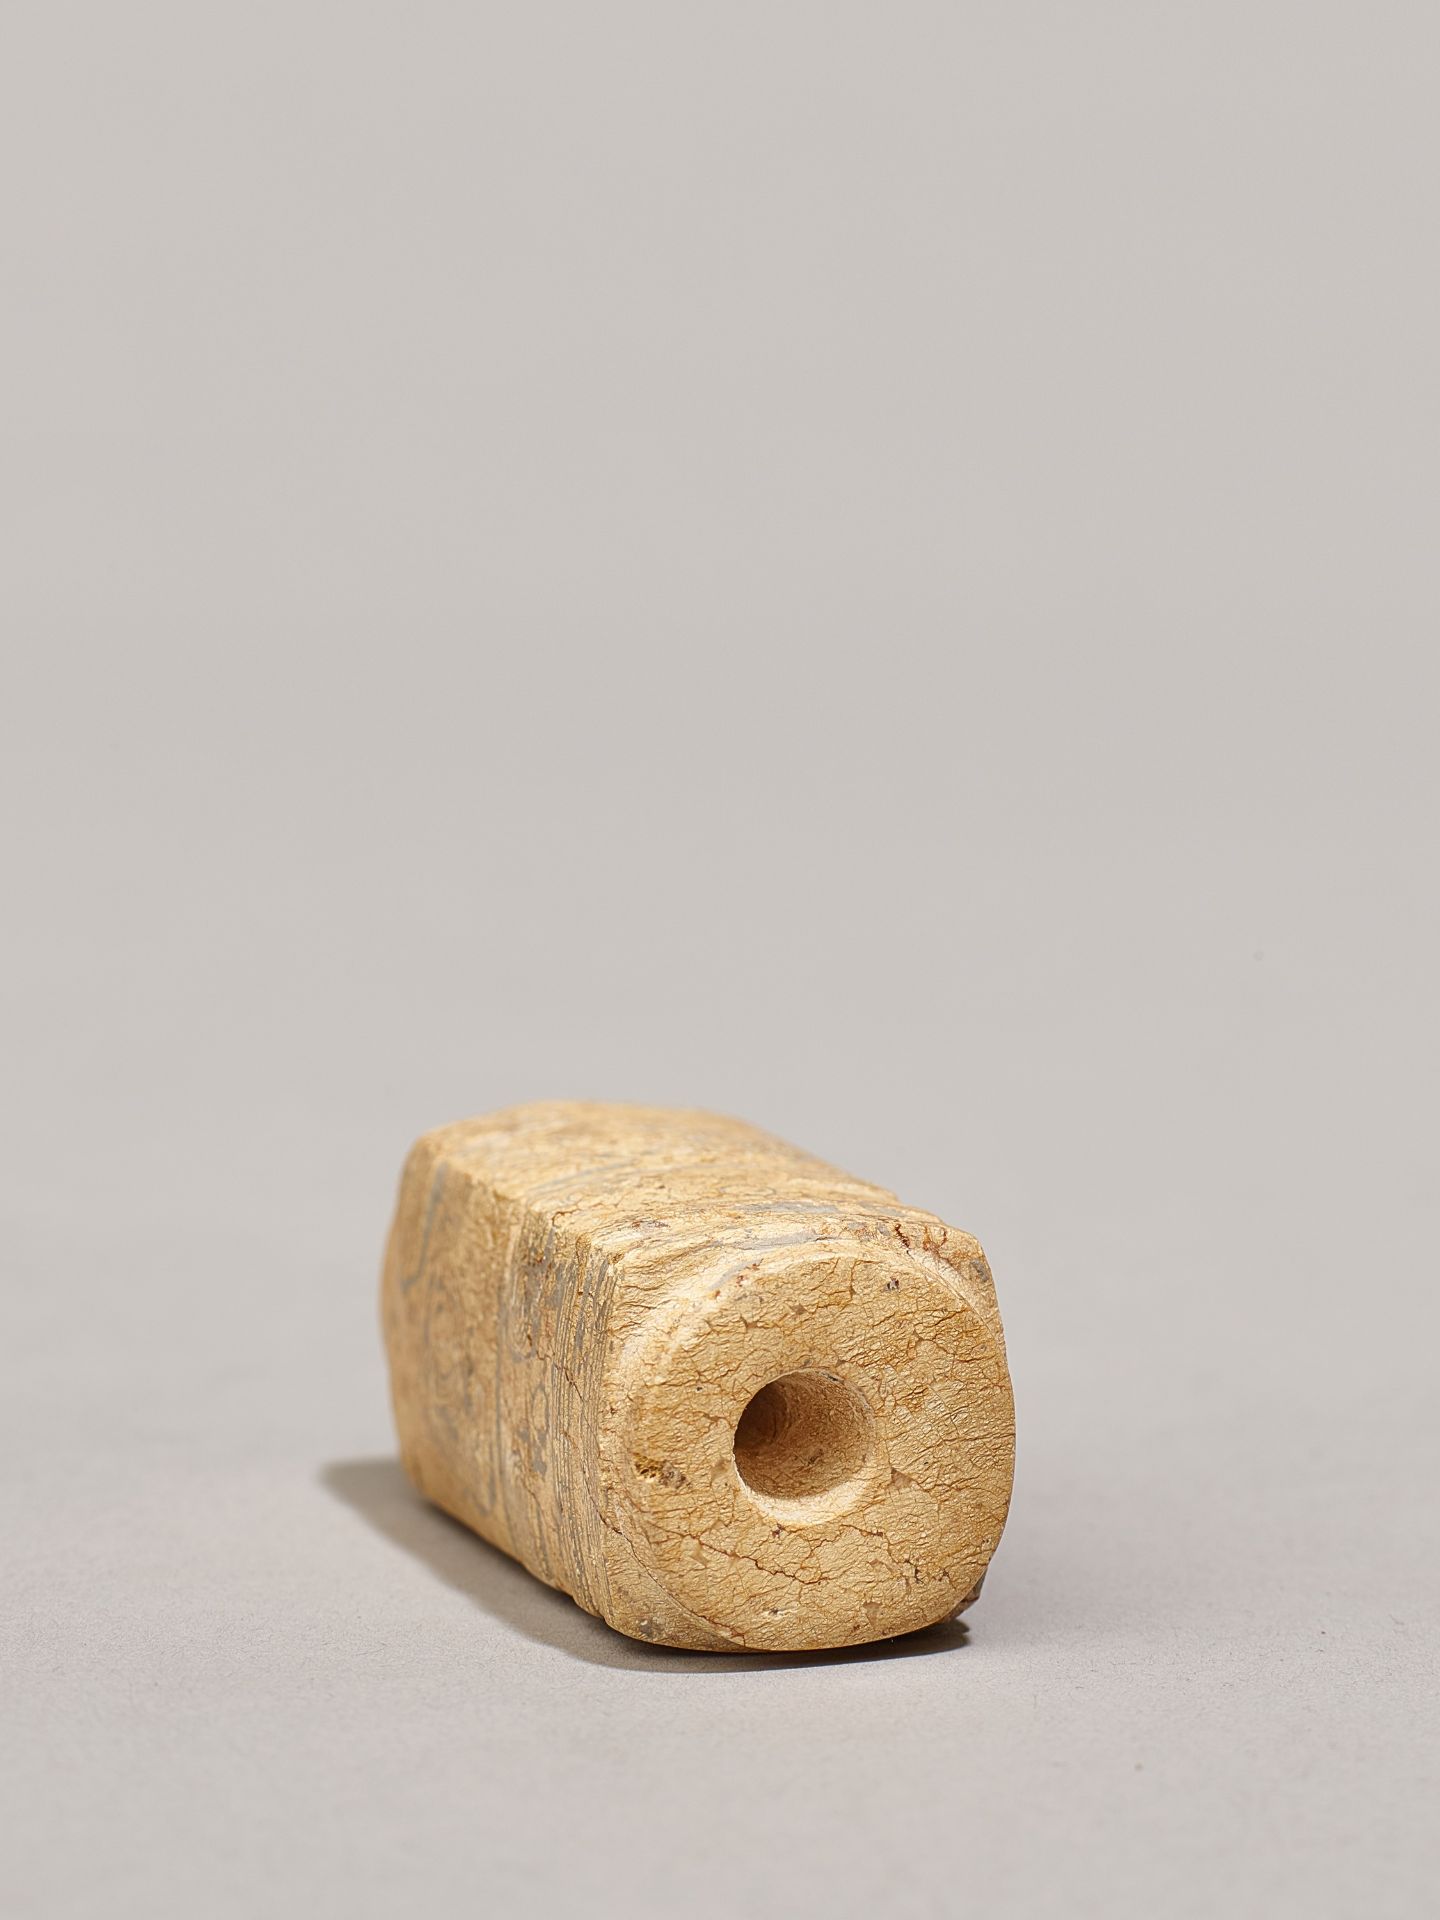 A JADE CONG-FORM BEAD, LIANGZHU CULTURE - Image 6 of 7